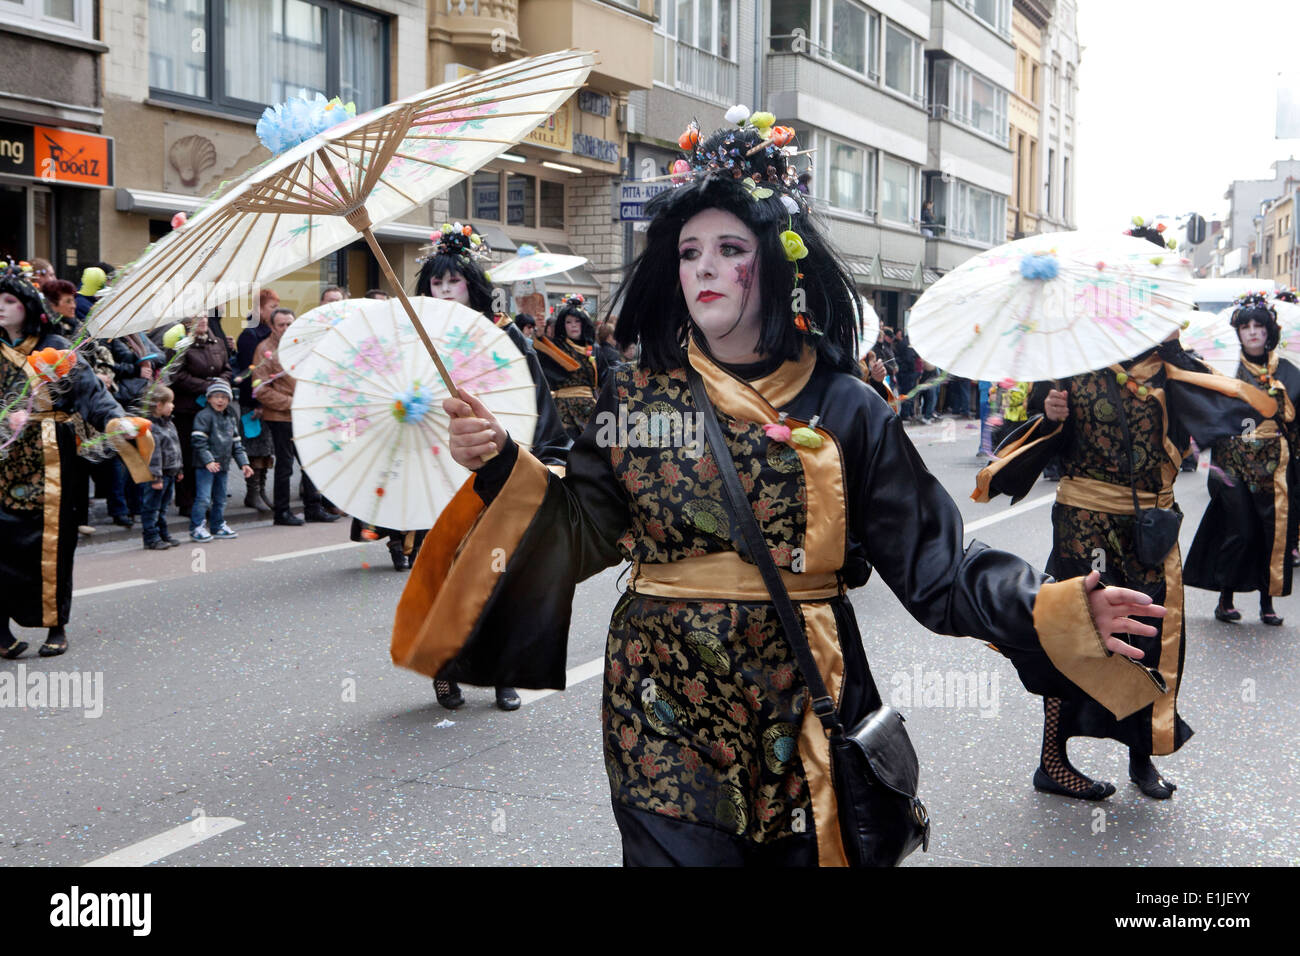 Parade dancing in street in traditional Japanese costumes with parasols, Ostend Carnival, Belgium Stock Photo